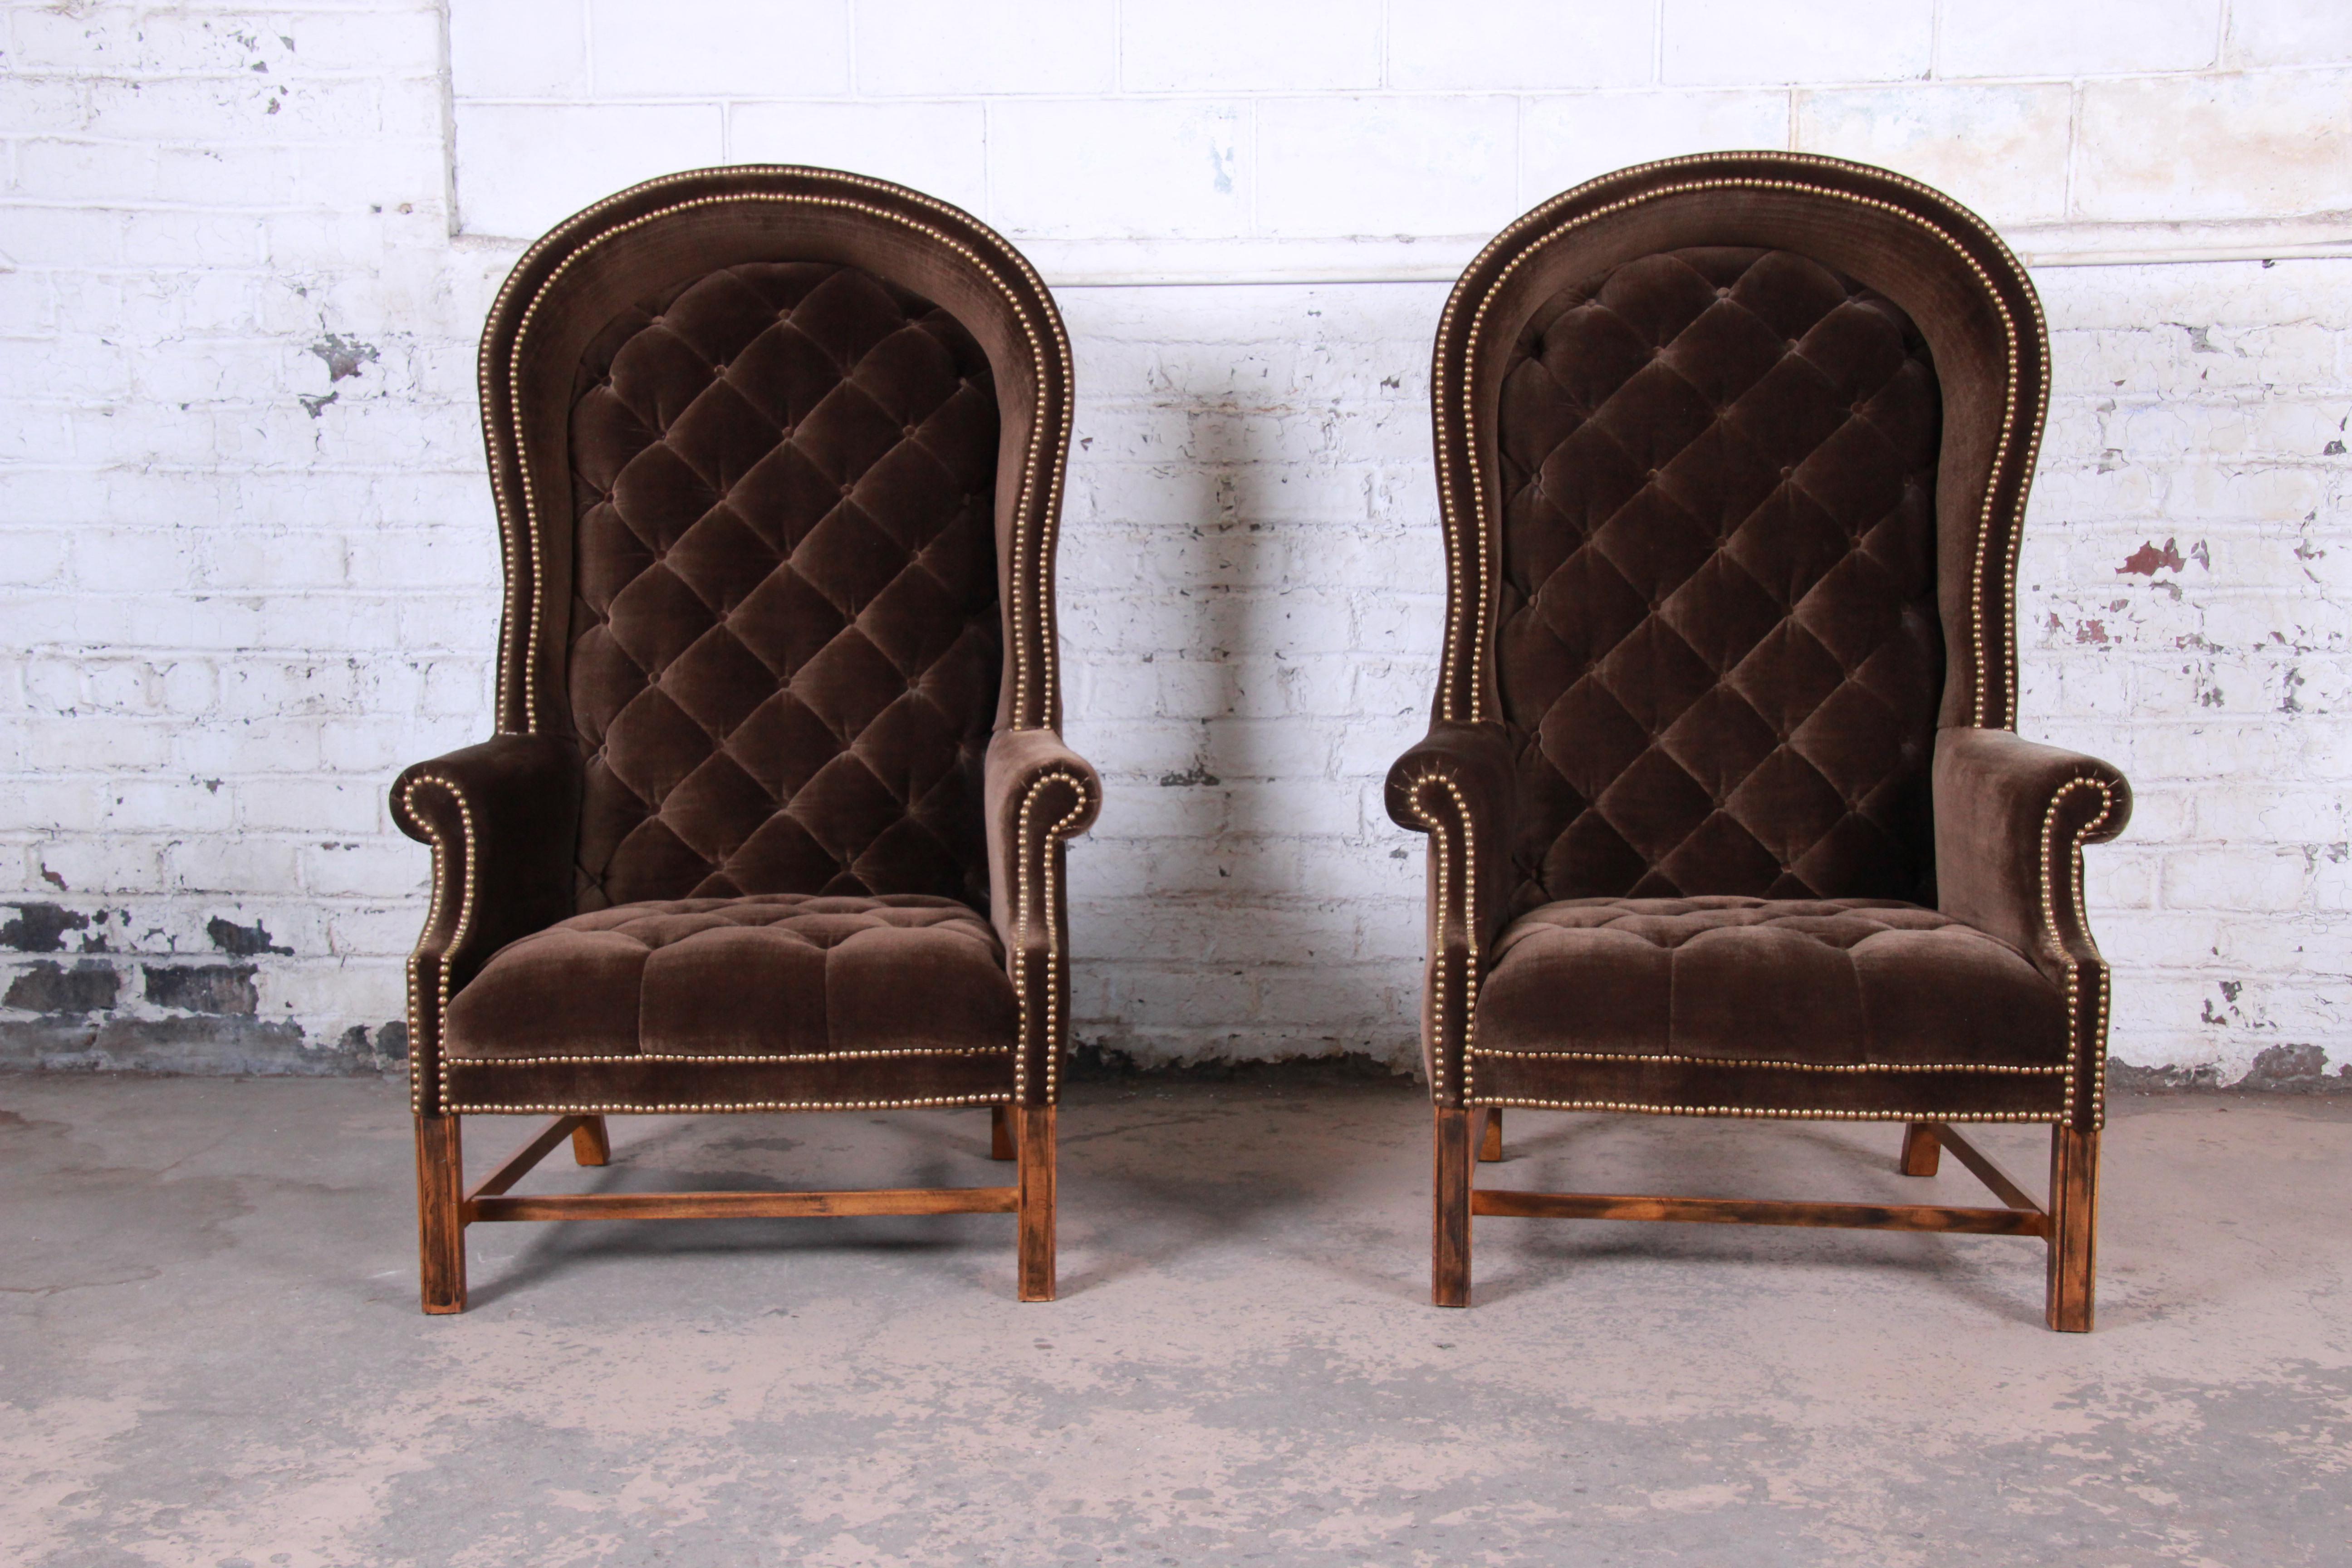 An exceptional pair of midcentury brown velvet hooded canopy Porter's chairs. The chairs feature solid wood legs and frames and gorgeous brass-studded tufted brown velvet upholstery. They are comfortable and ready for use. Very good vintage